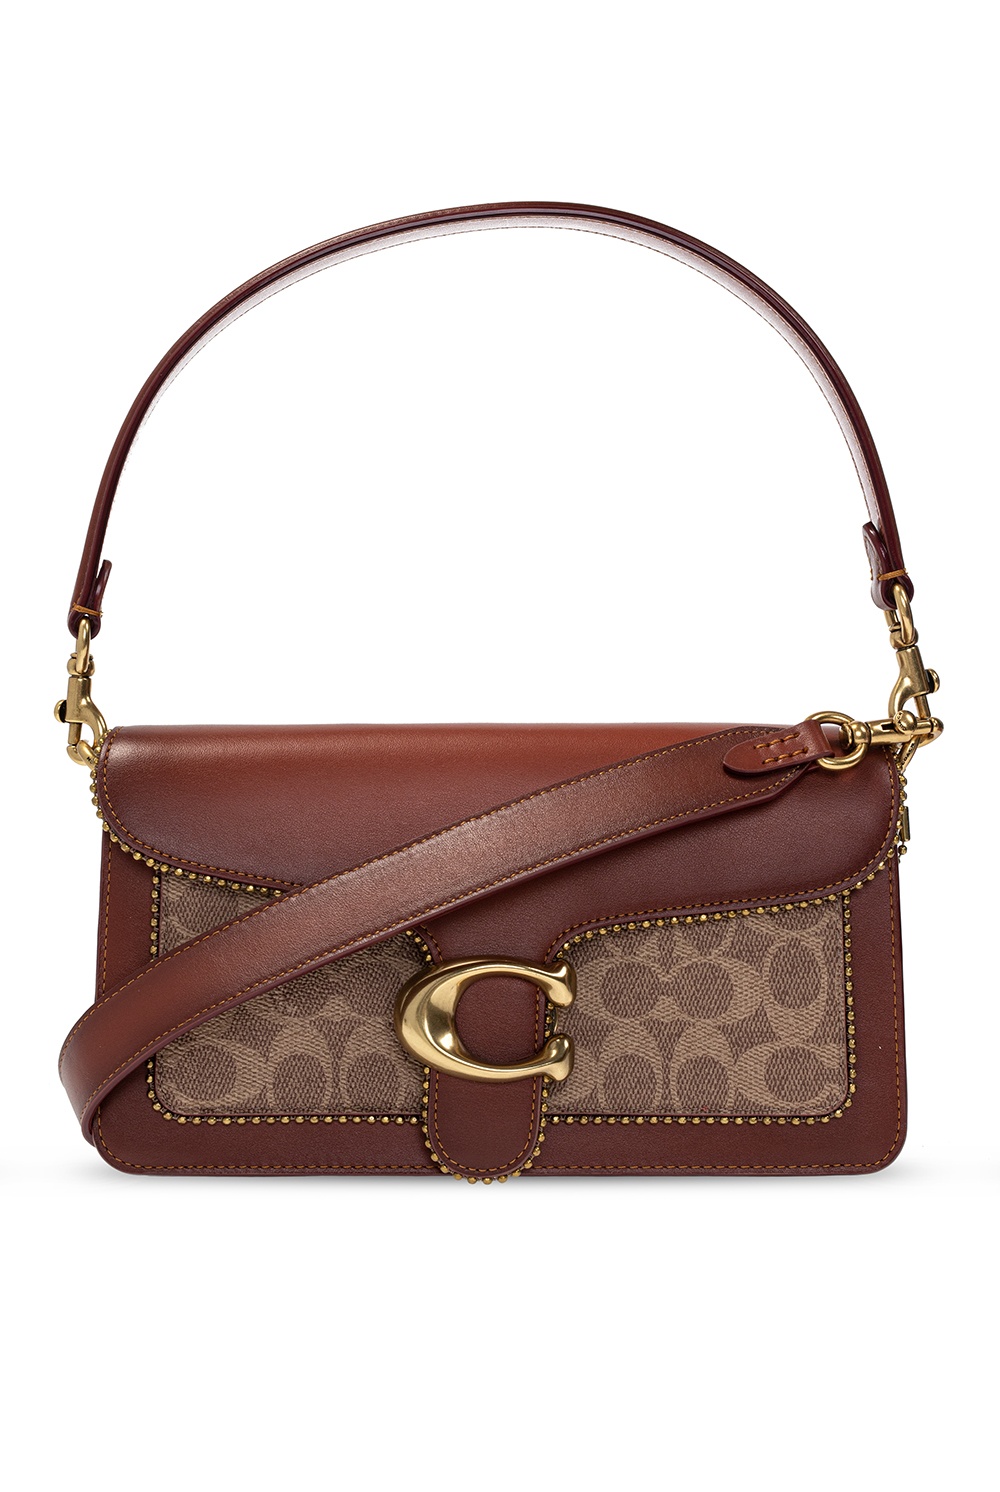 Polished Pebble Leather Tabby Shoulder Bag by Coach Online